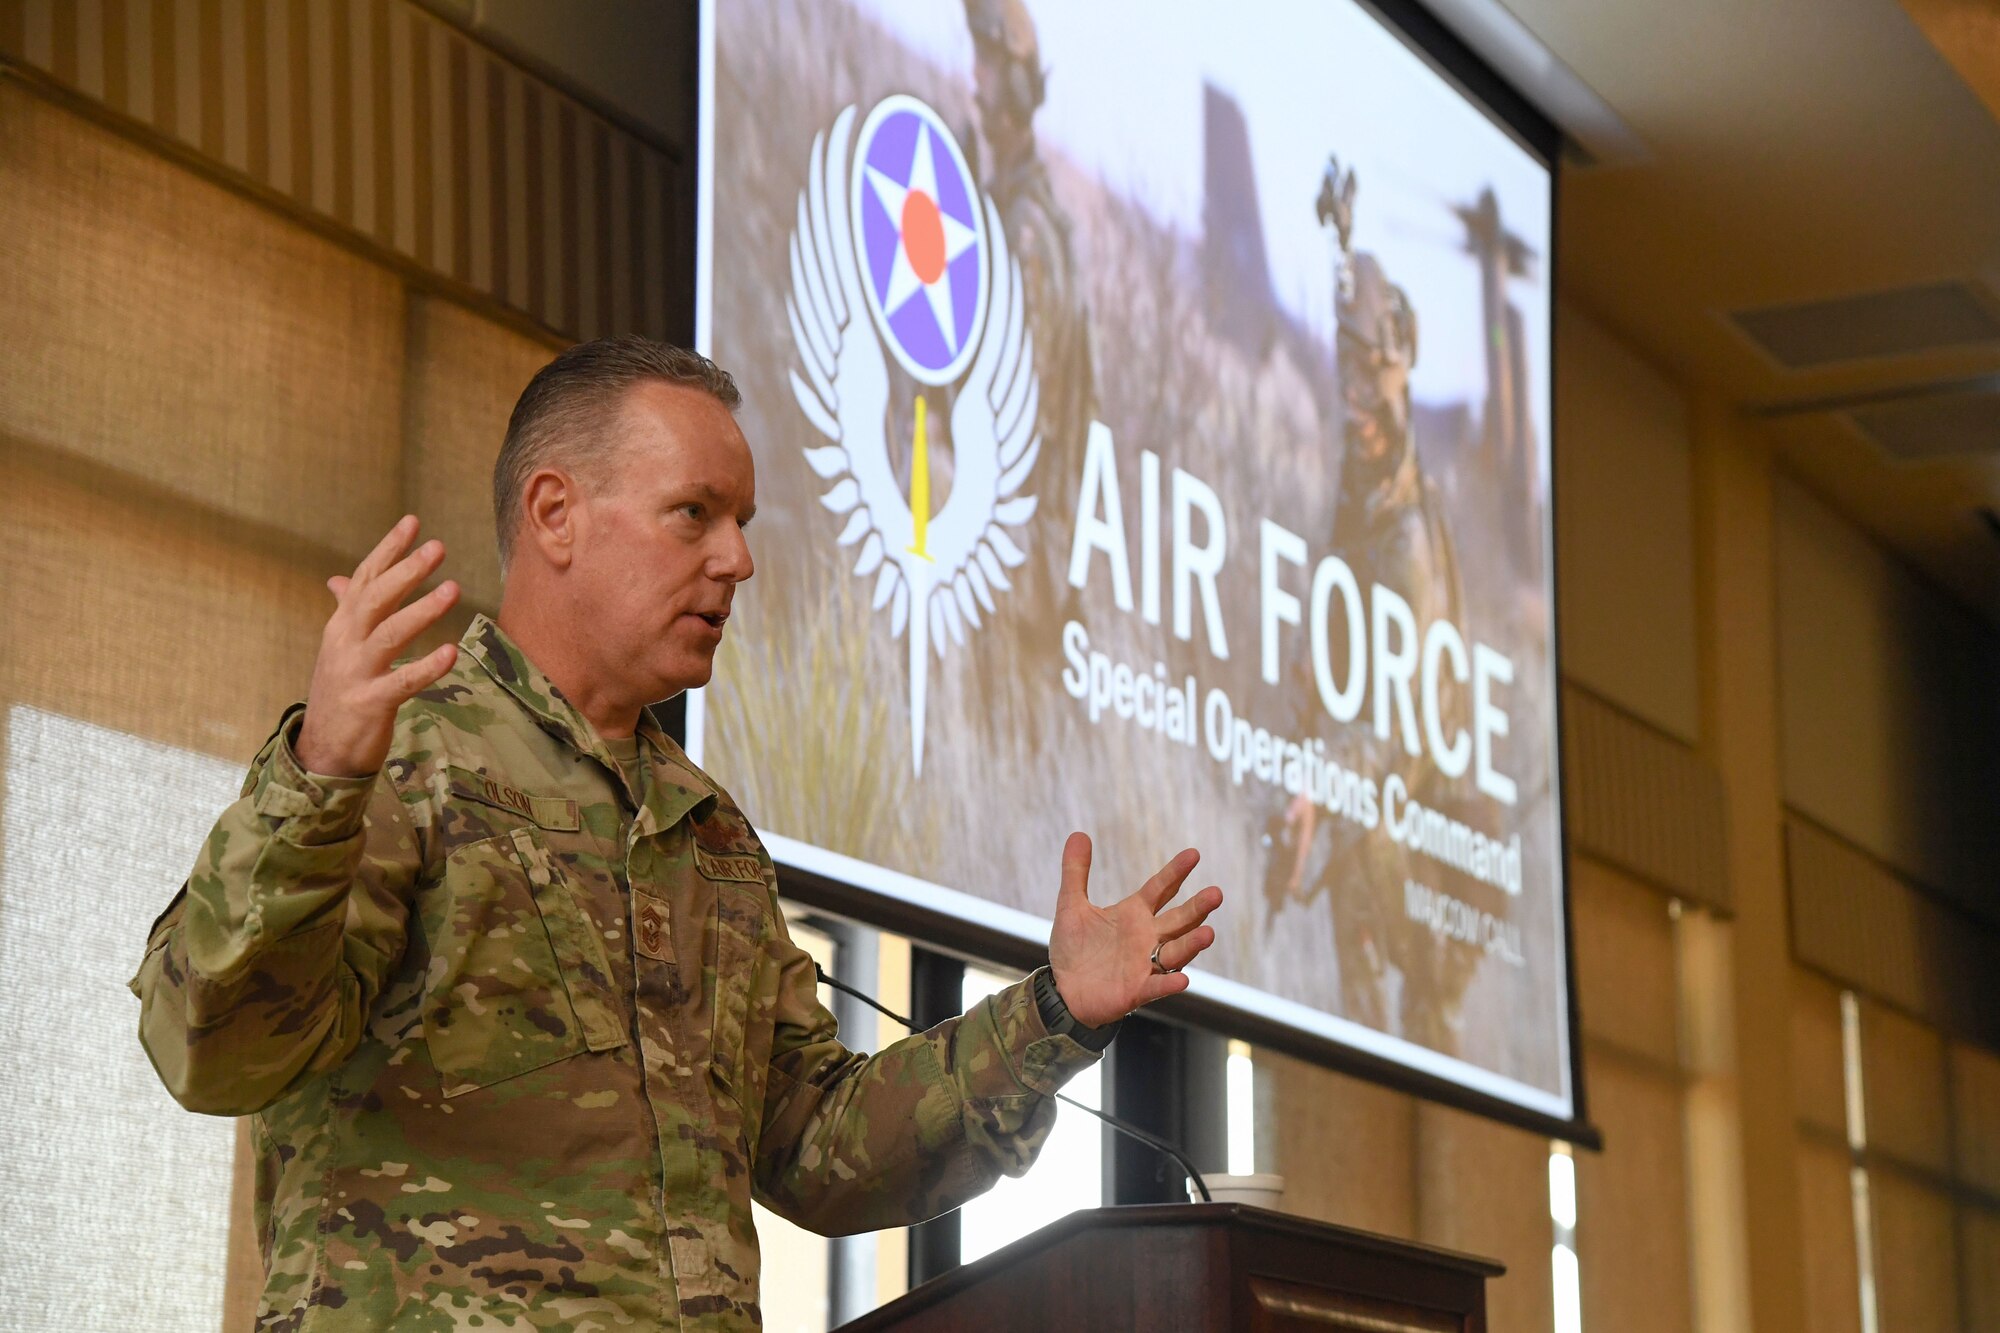 U.S. Air Force Chief Master Sgt. Cory Olson, command chief of Air Force Special Operations Command, delivers remarks during an AFSOC all-call during the inaugural Torch and Dagger professional development seminar at Keesler Air Force Base, Mississippi, Oct. 15, 2022.